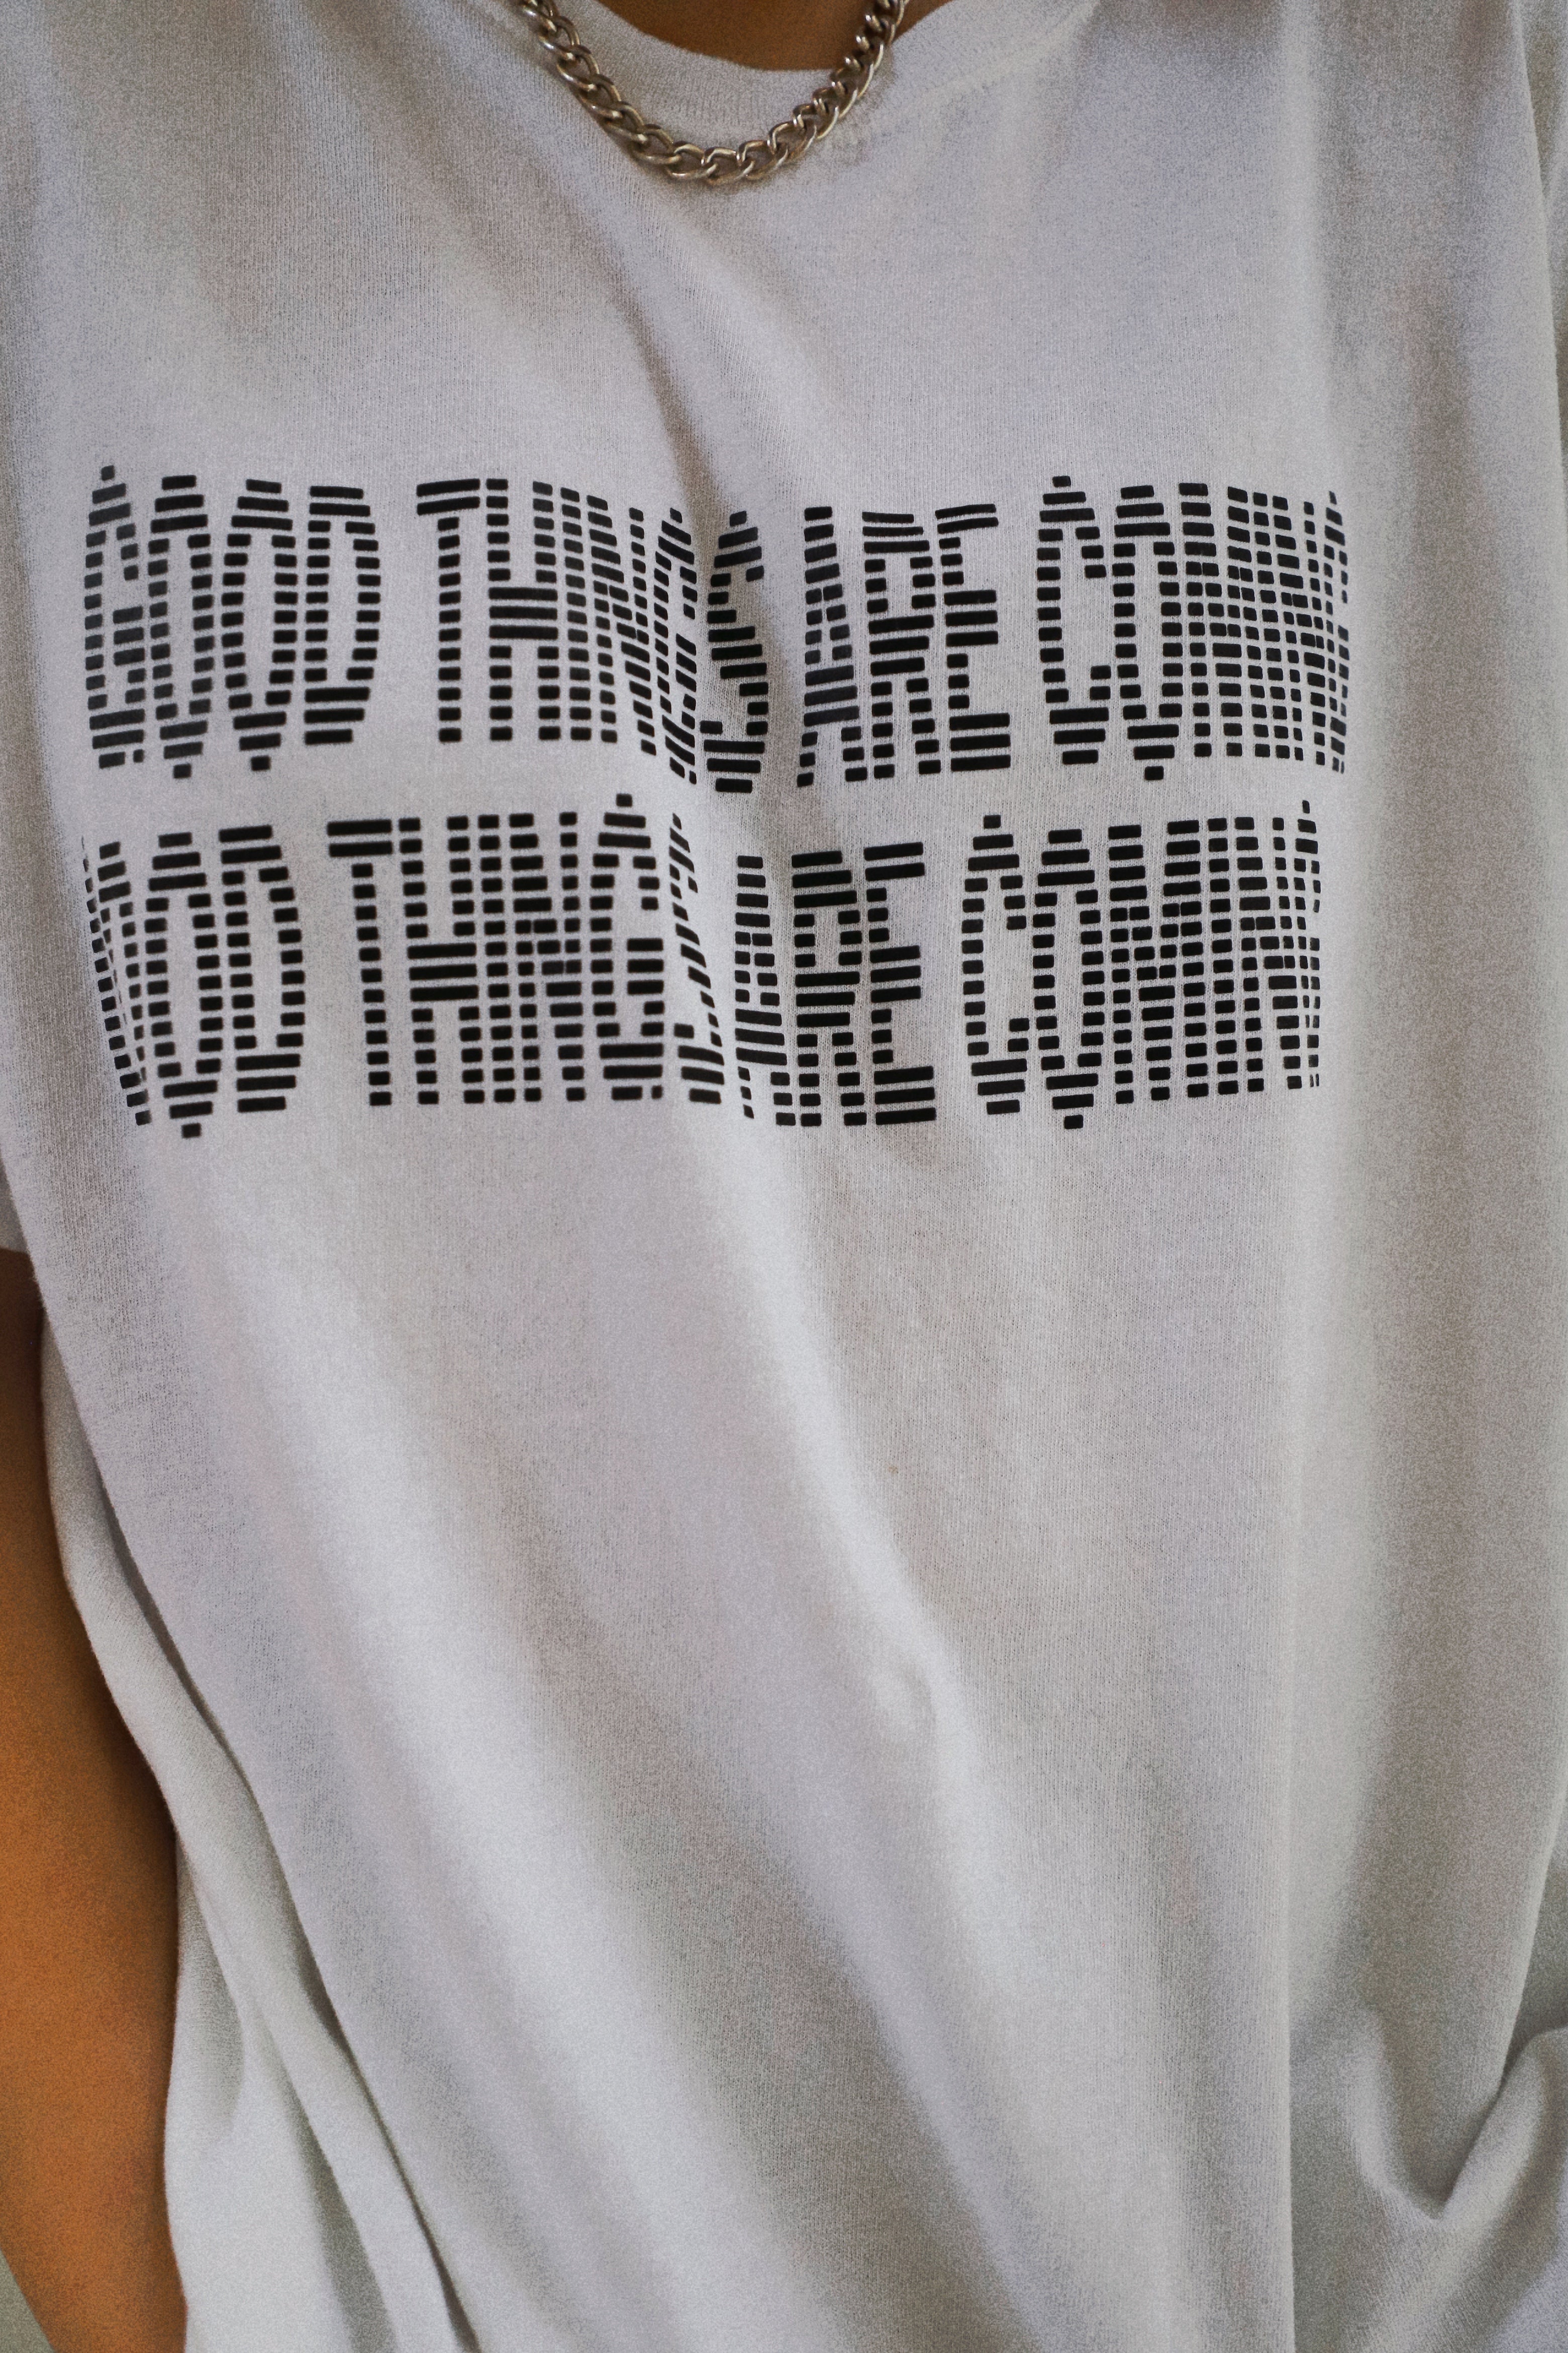 GOOD THINGS ARE COMING SHIRT